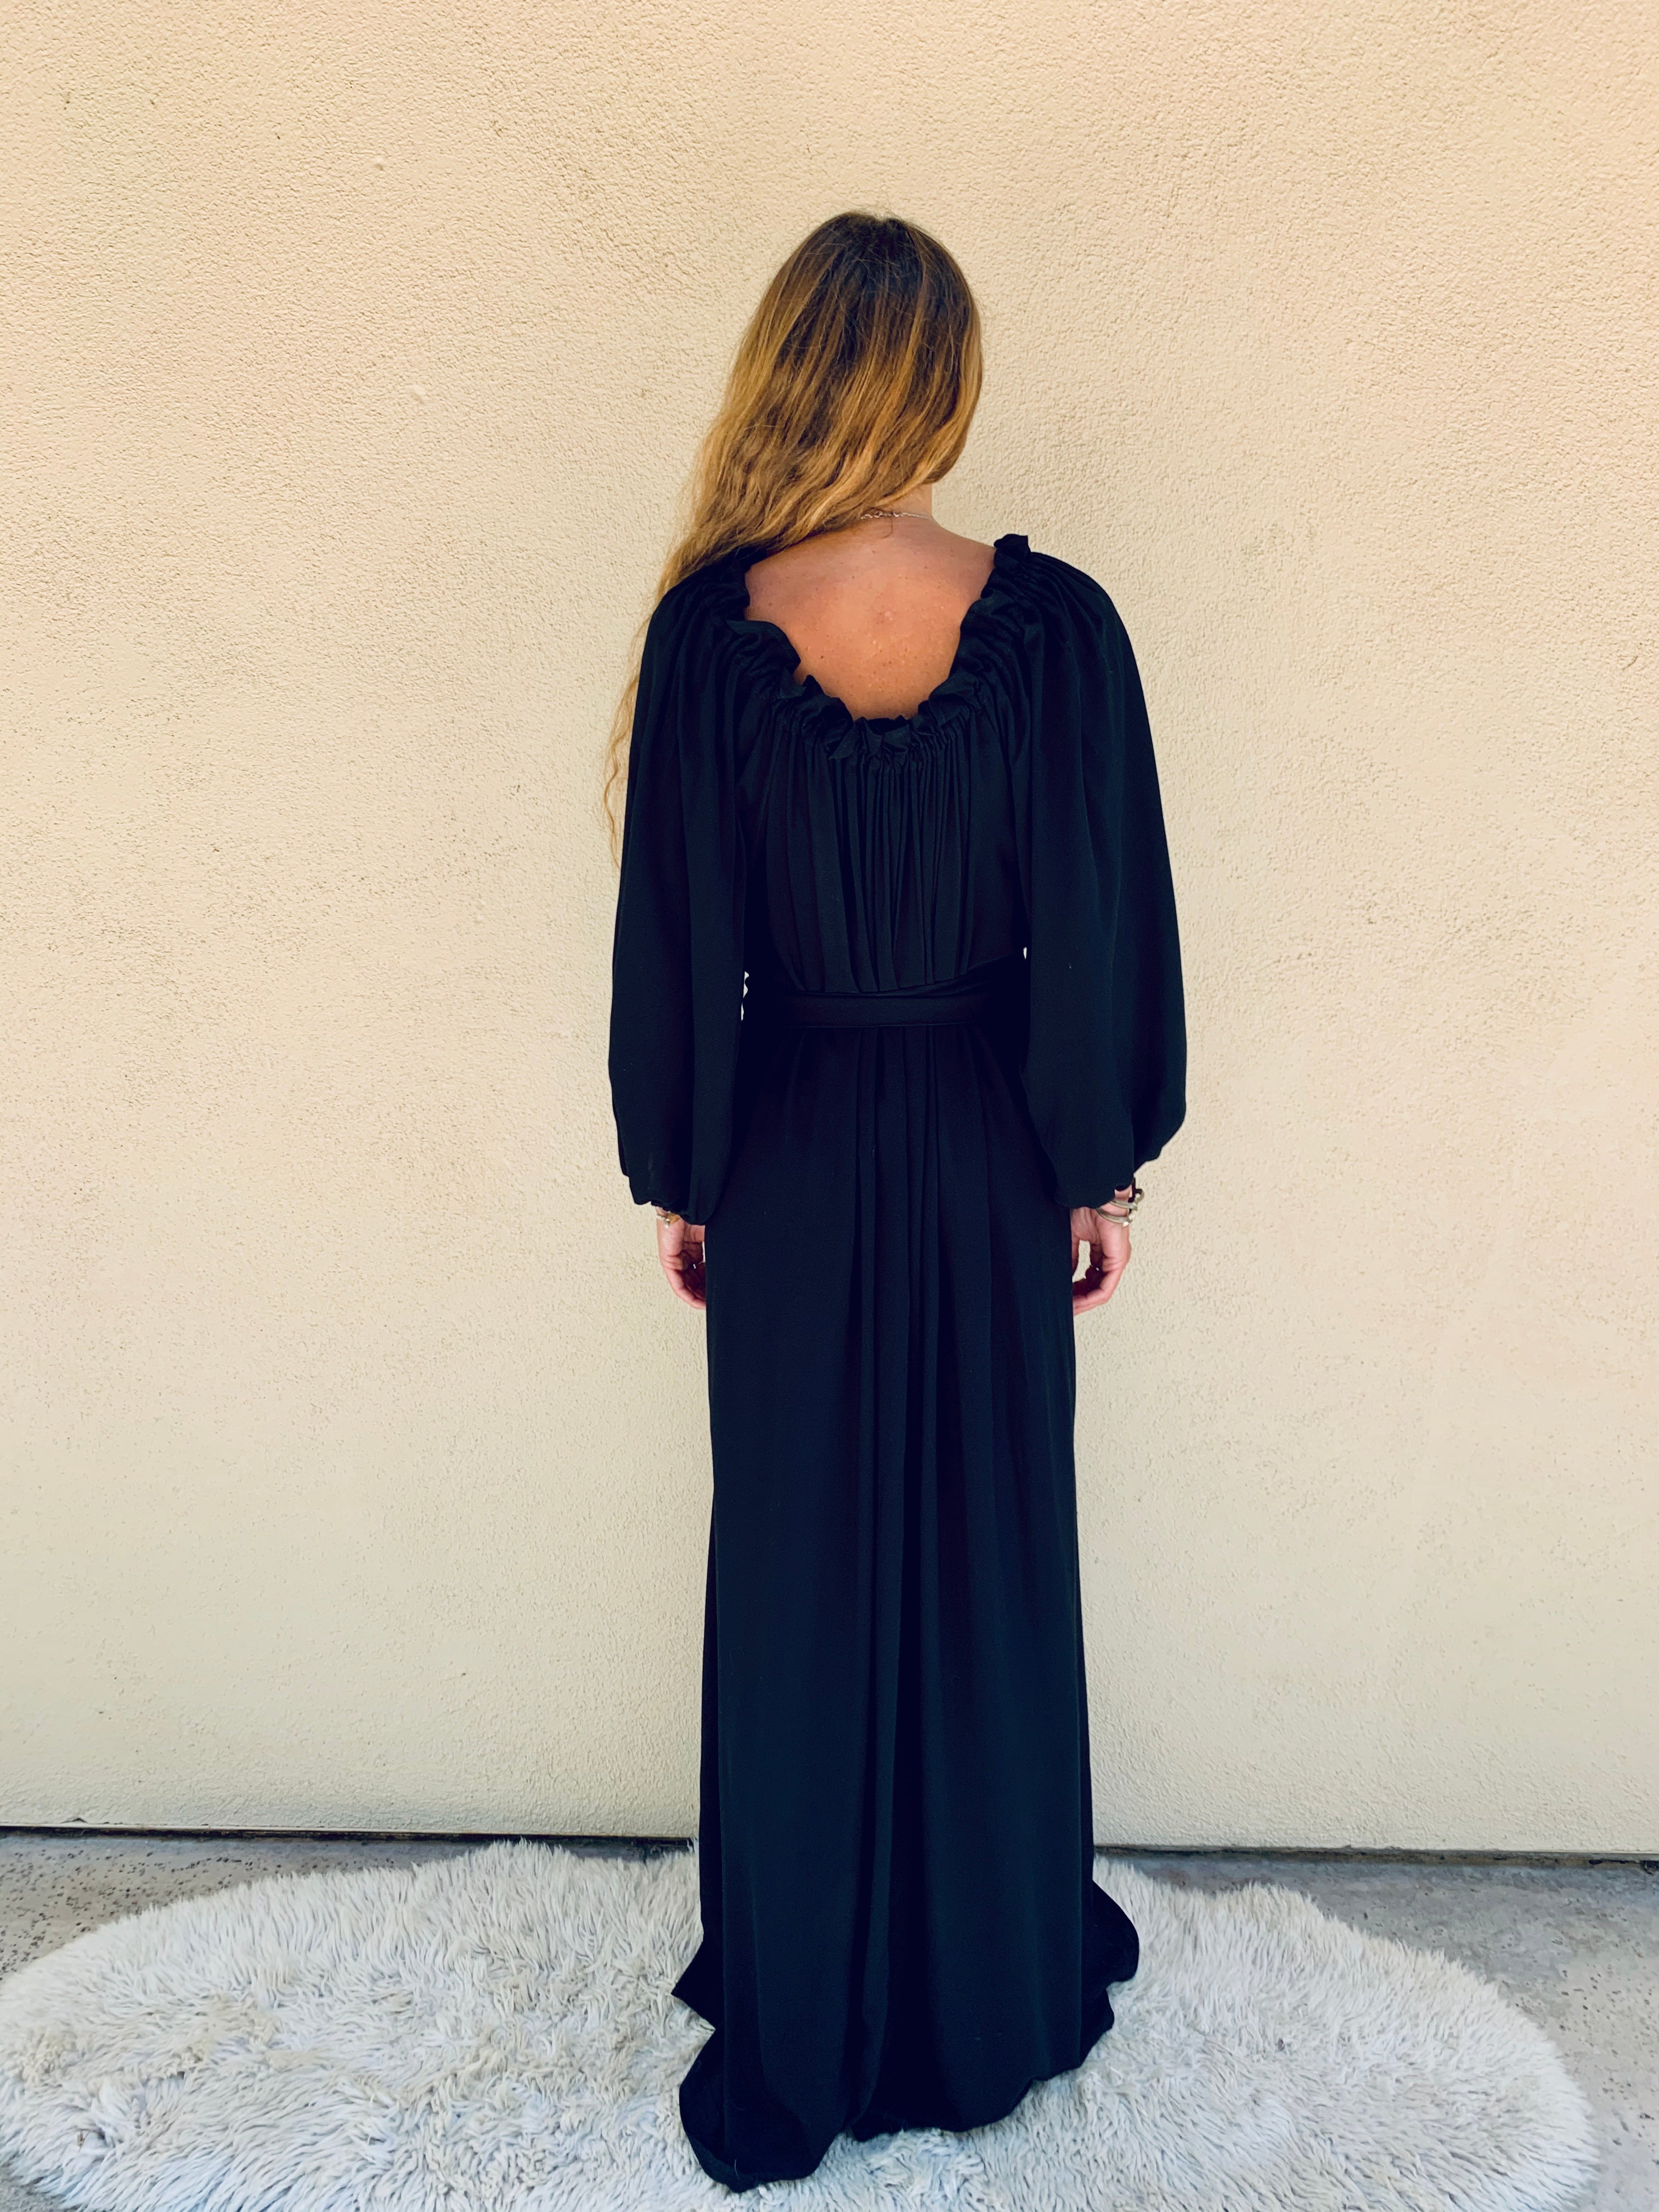 Time for Travel Dress in Black